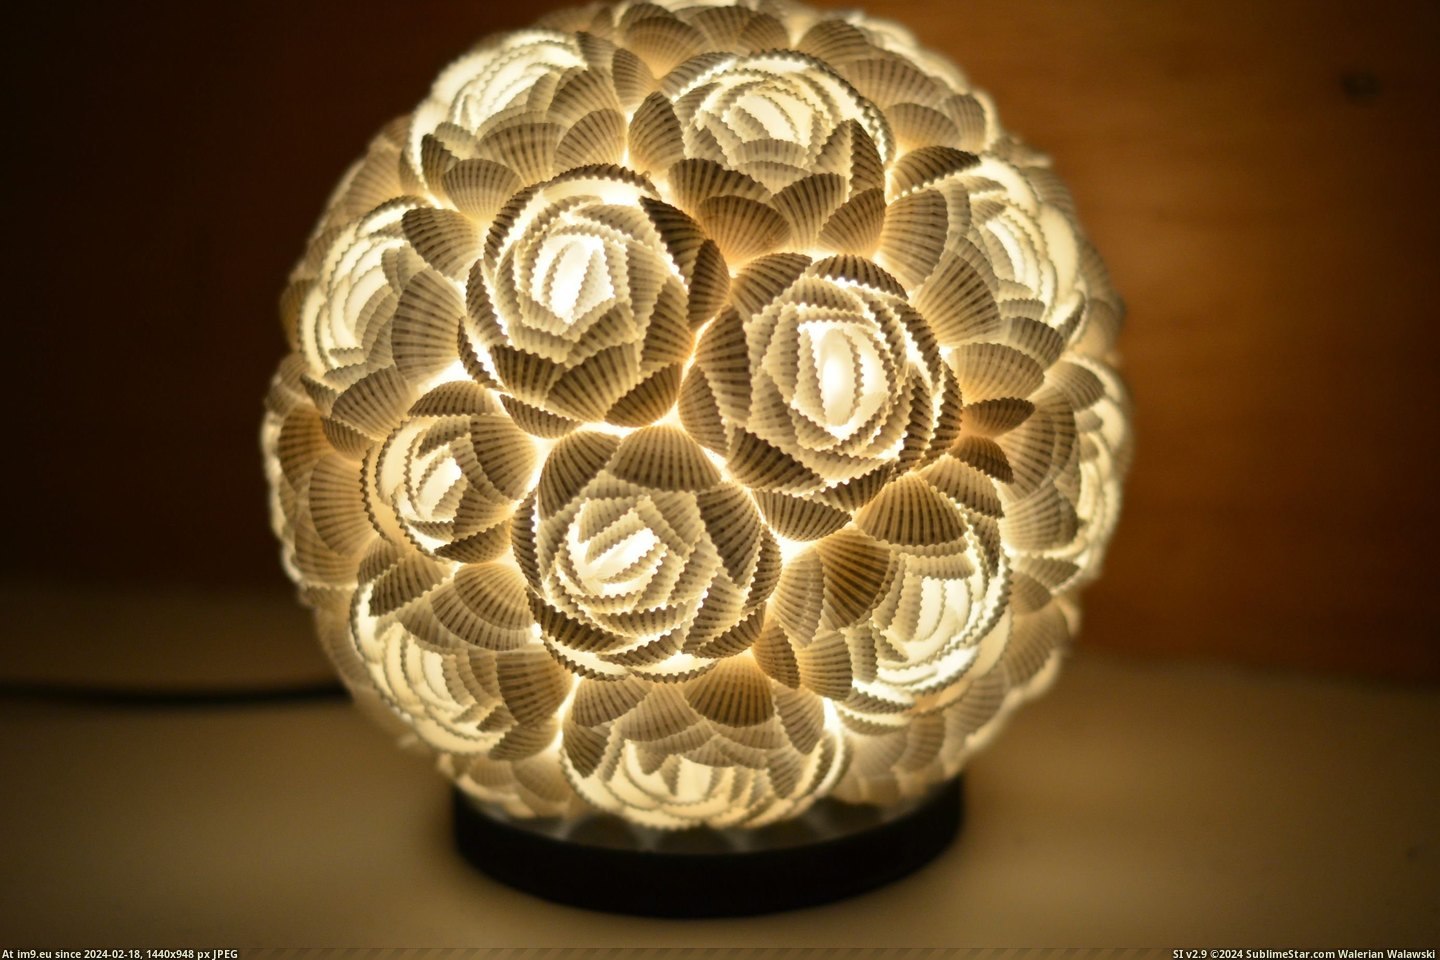 #World #Bought #Prettiest #Shells #Sea #Lamp [Pics] Yesterday I bought perhaps the prettiest table lamp in the world. It's made of sea shells. Pic. (Image of album My r/PICS favs))